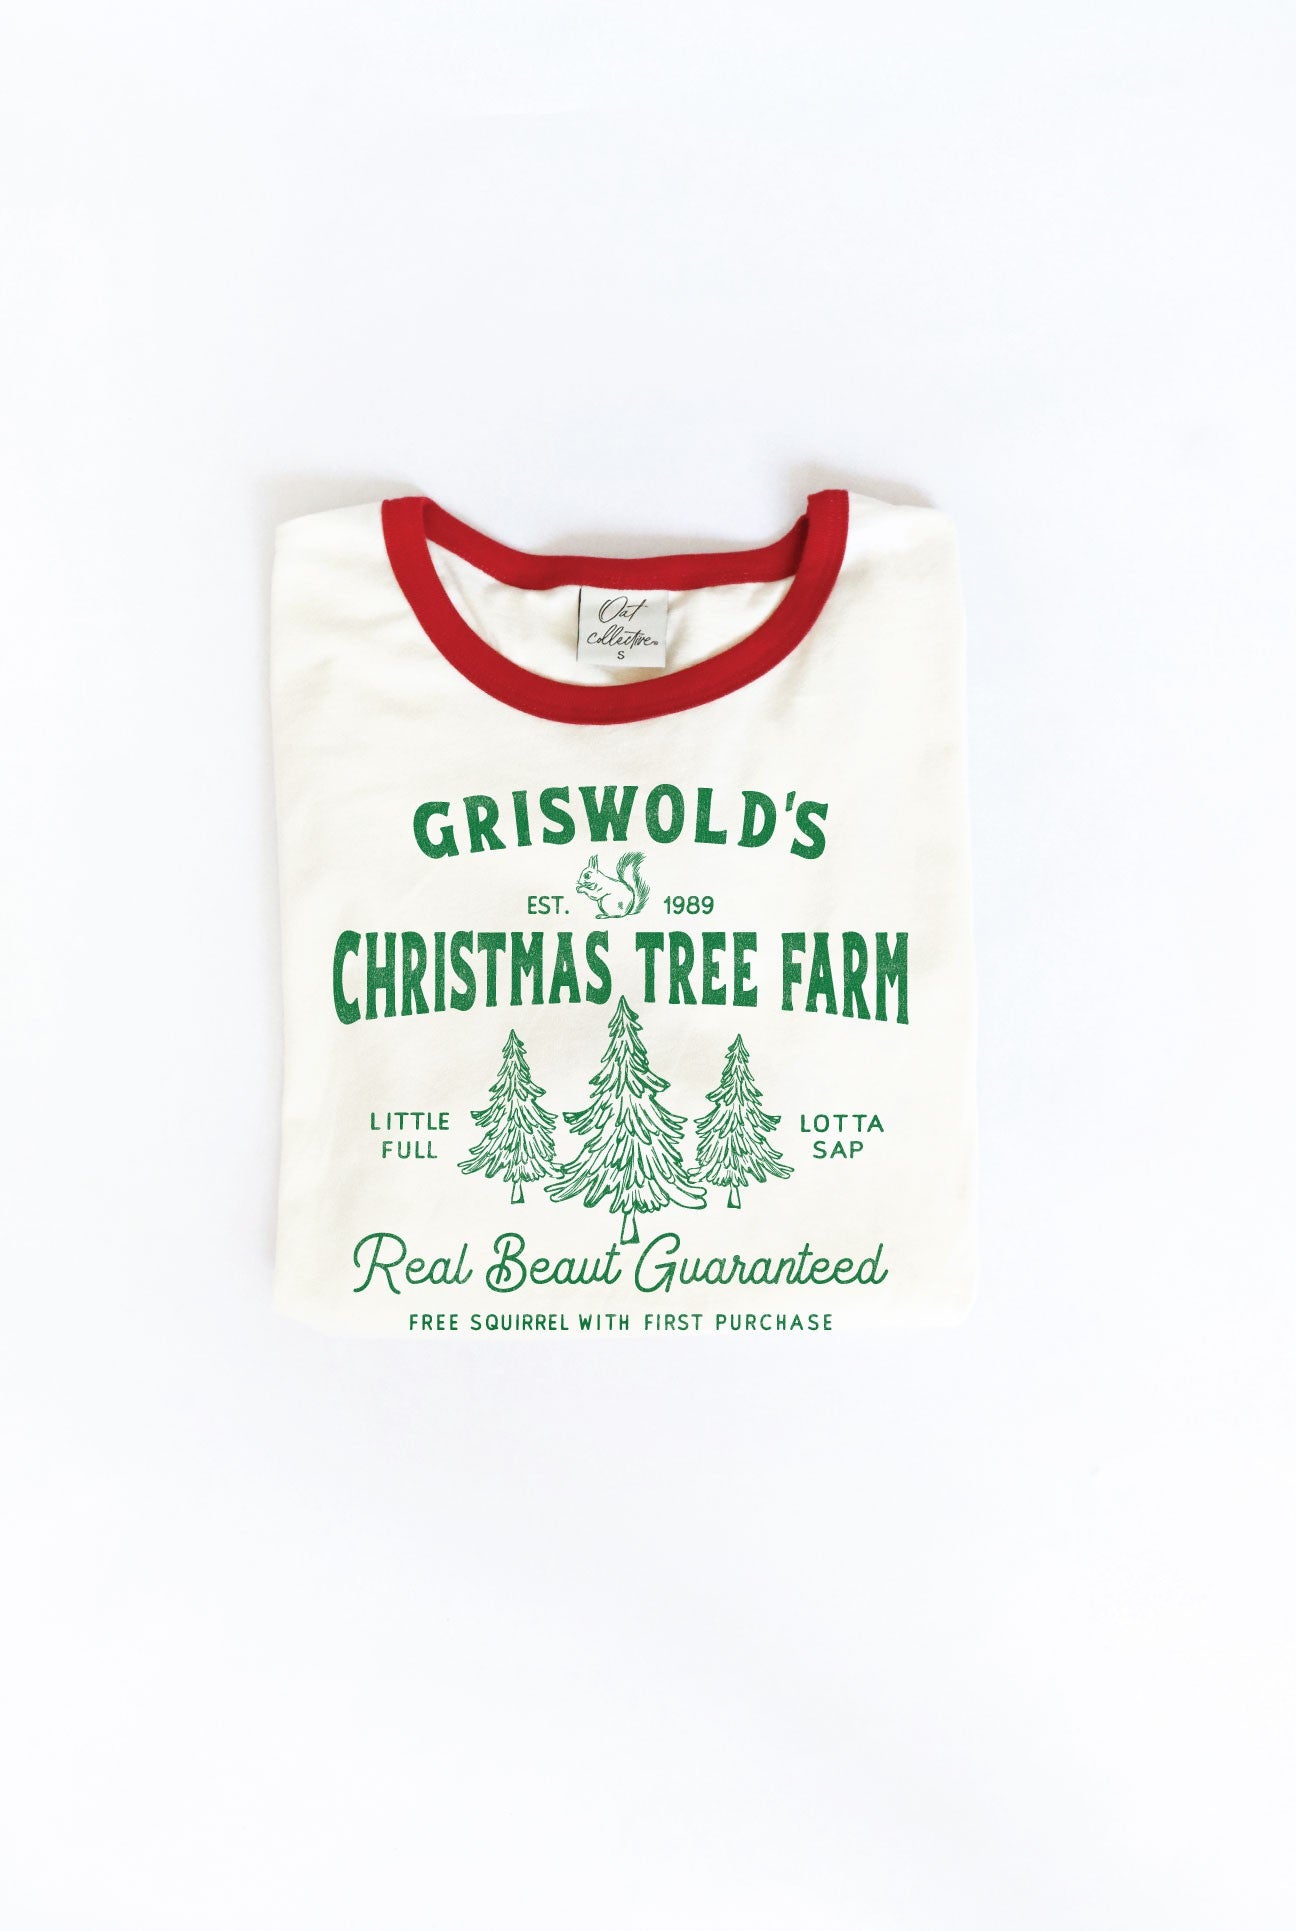 Griswold’s Tree Farm Graphic Tee lol